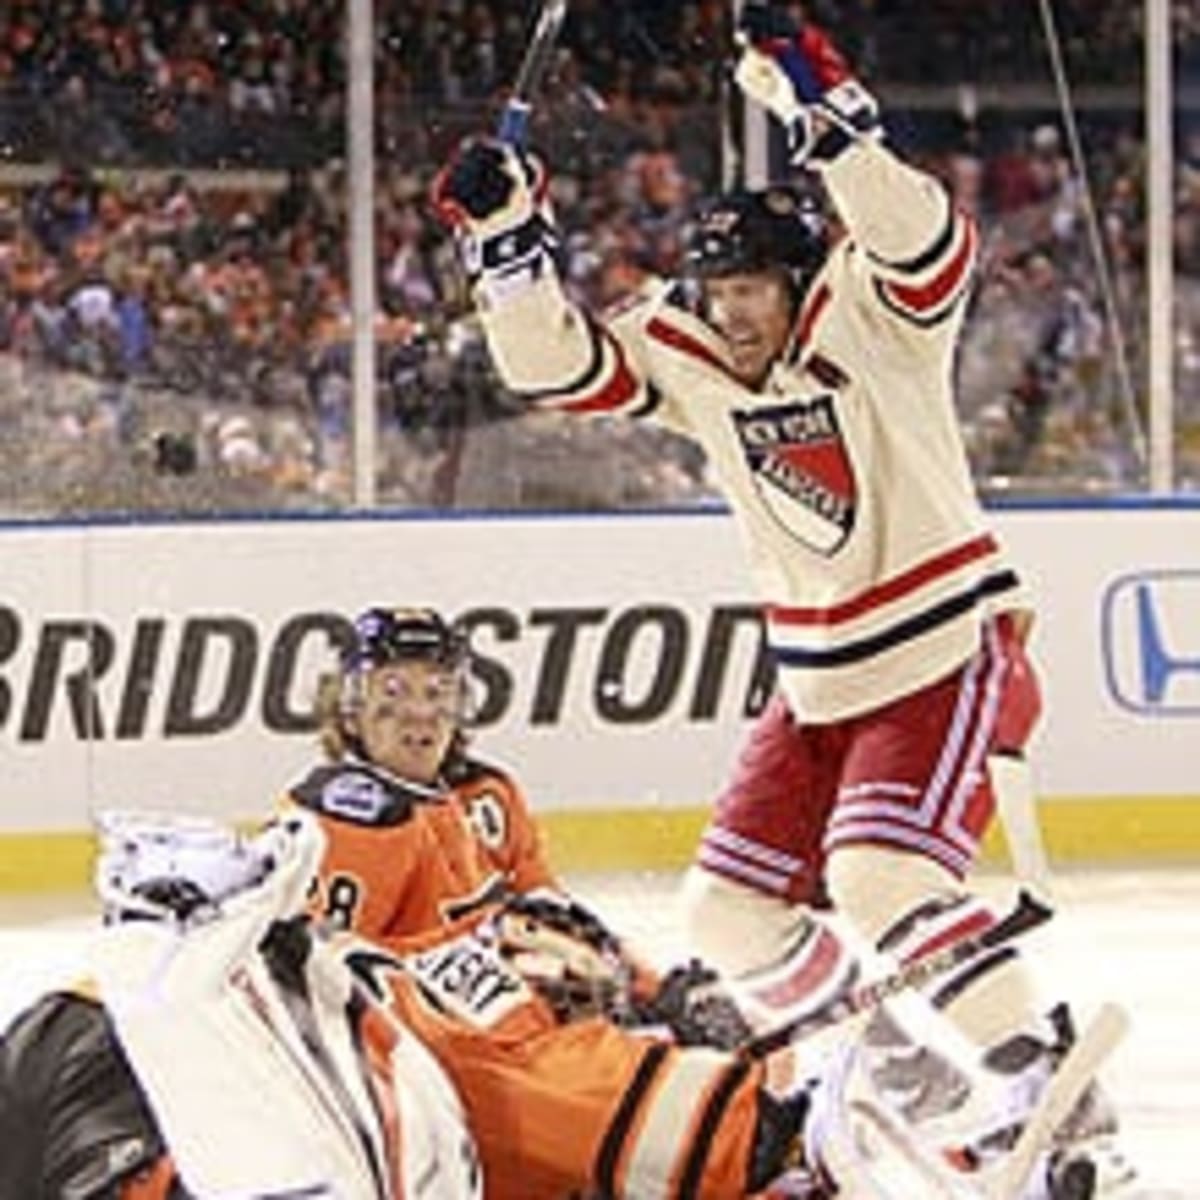 Rangers rally to beat Flyers 3-2 in Winter Classic - Deseret News